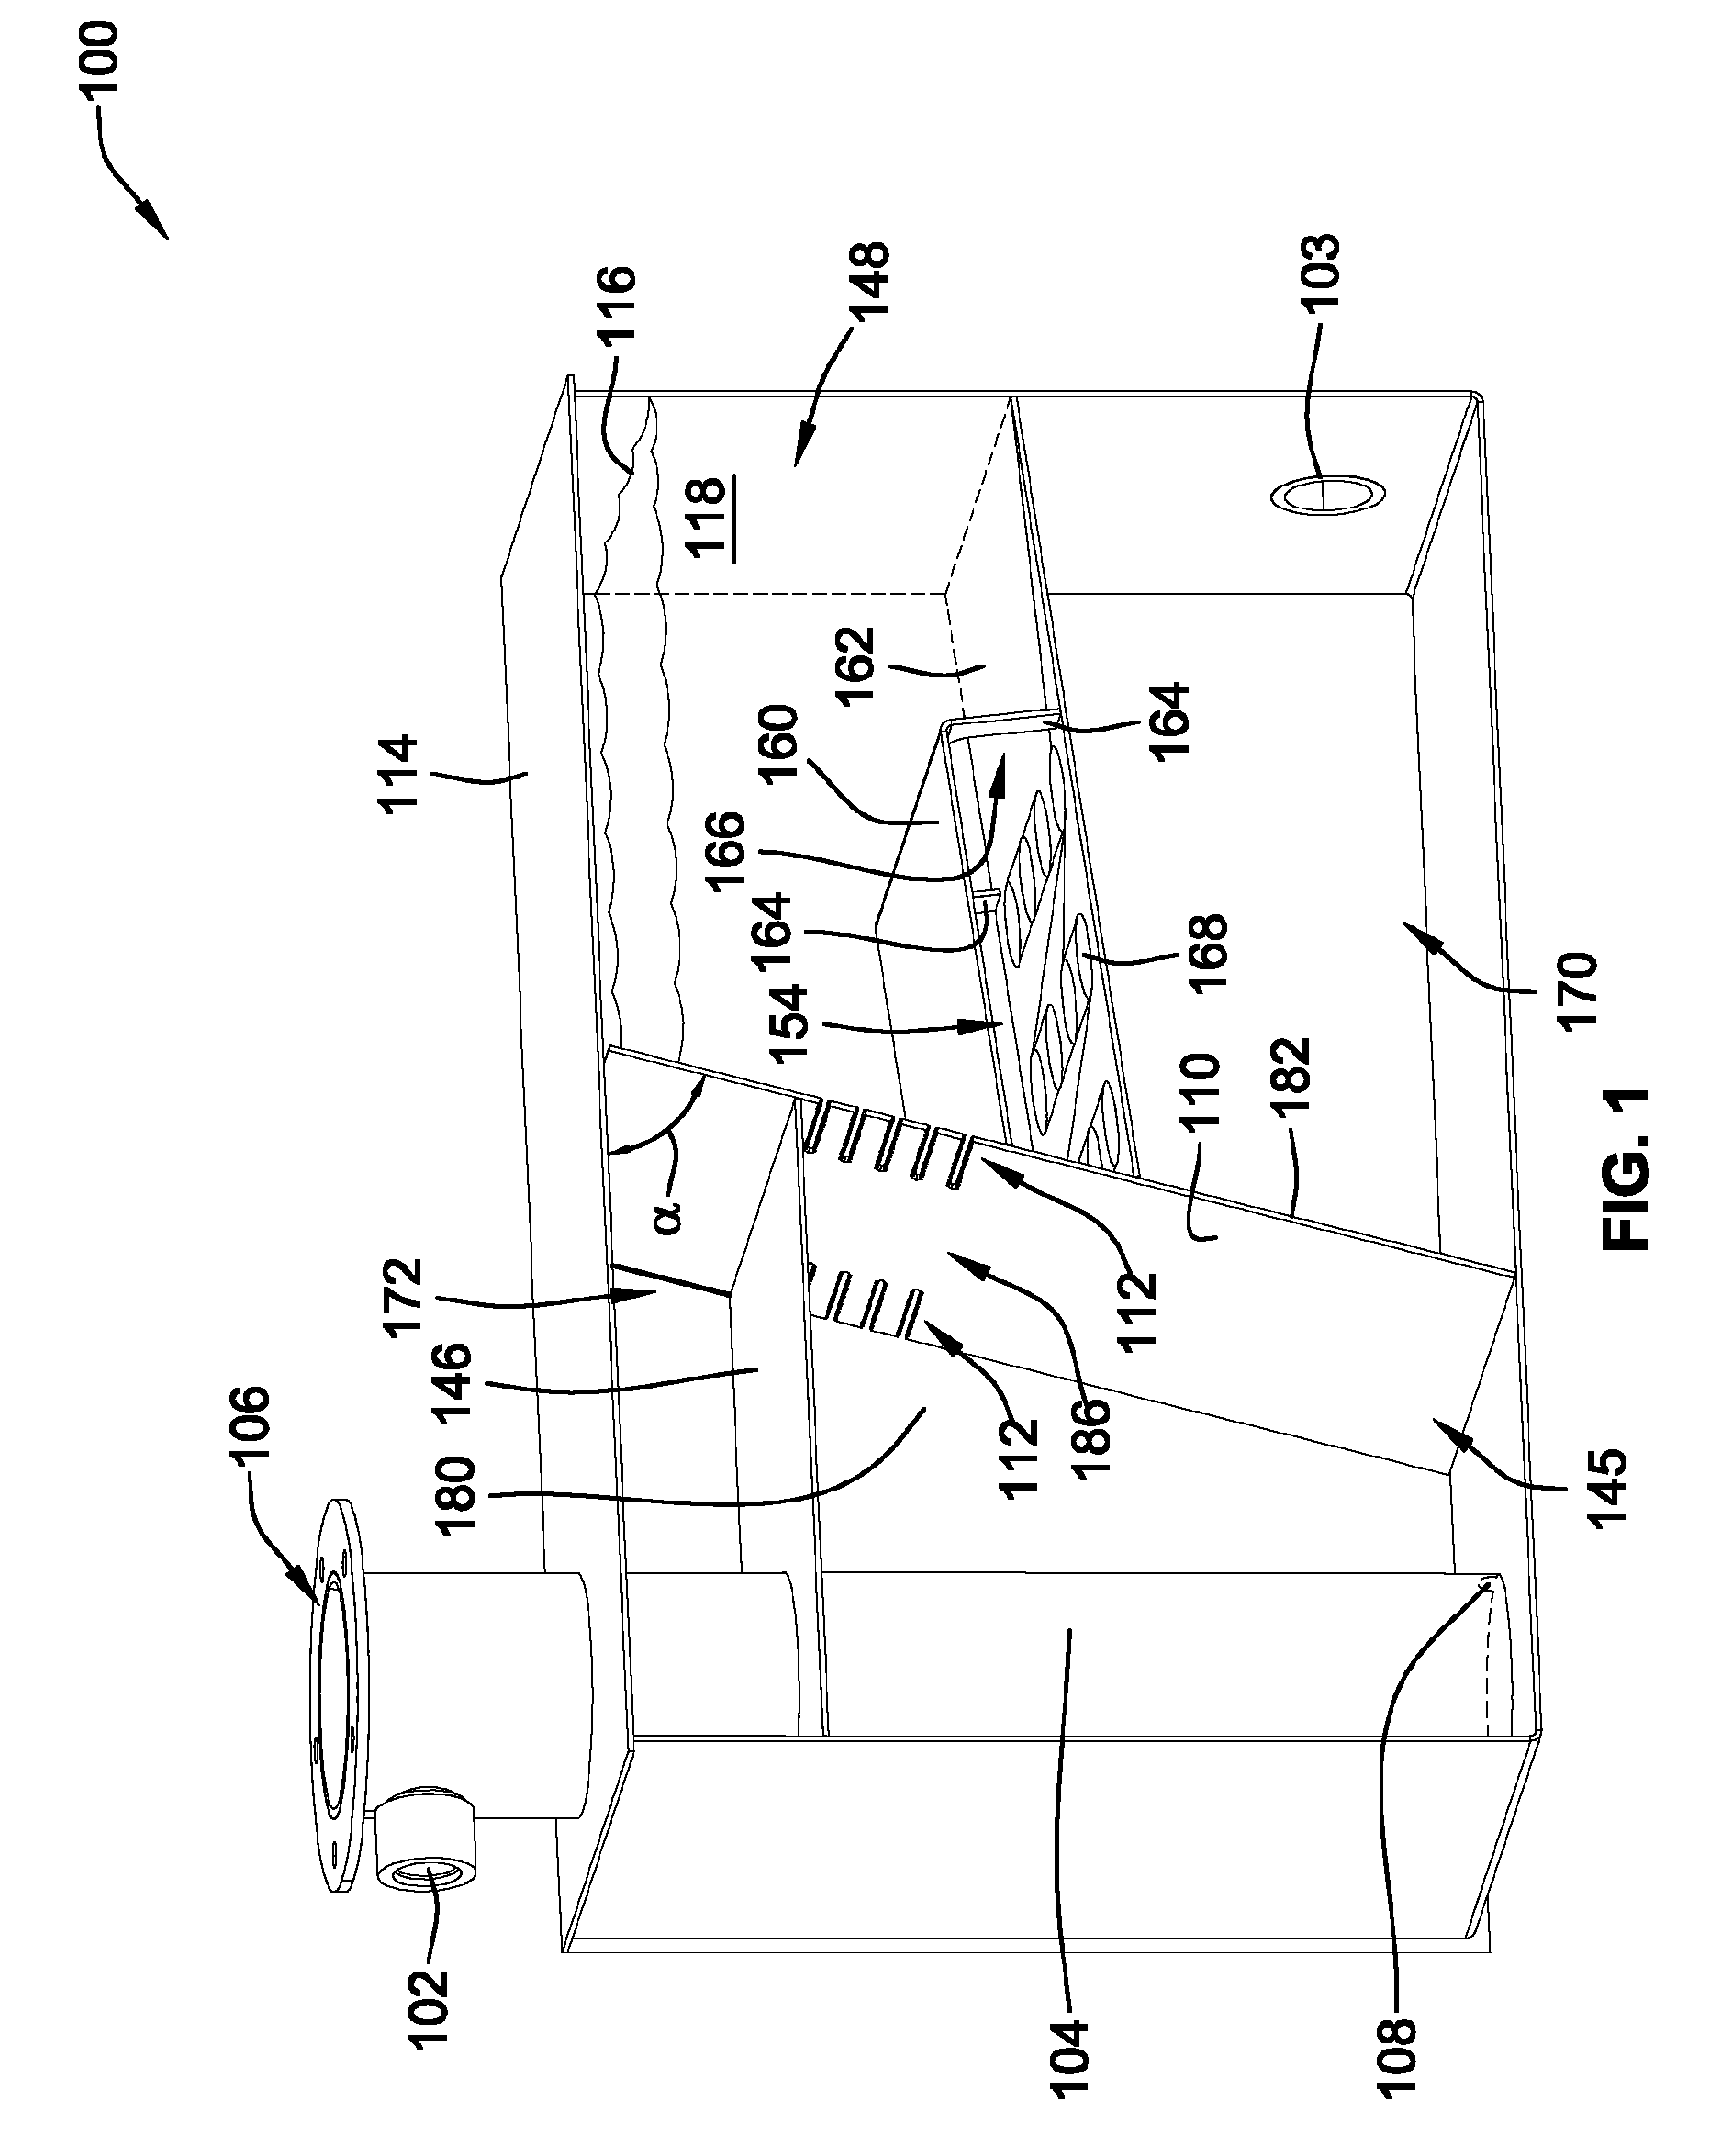 Fluid storage tank configured to remove entrained air from fluid